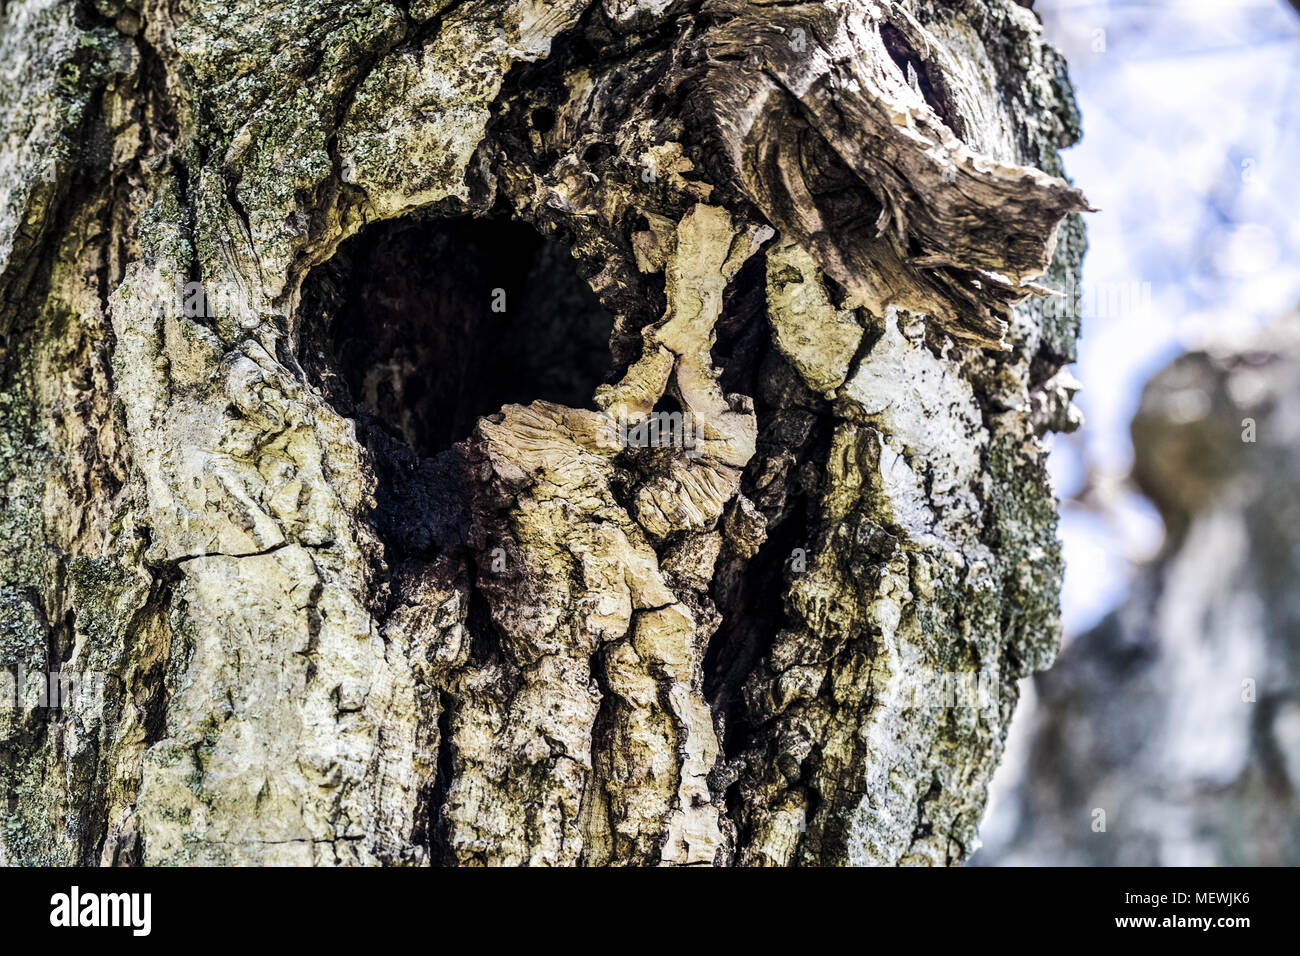 hollow in the tree, background image, close-up photo Stock Photo